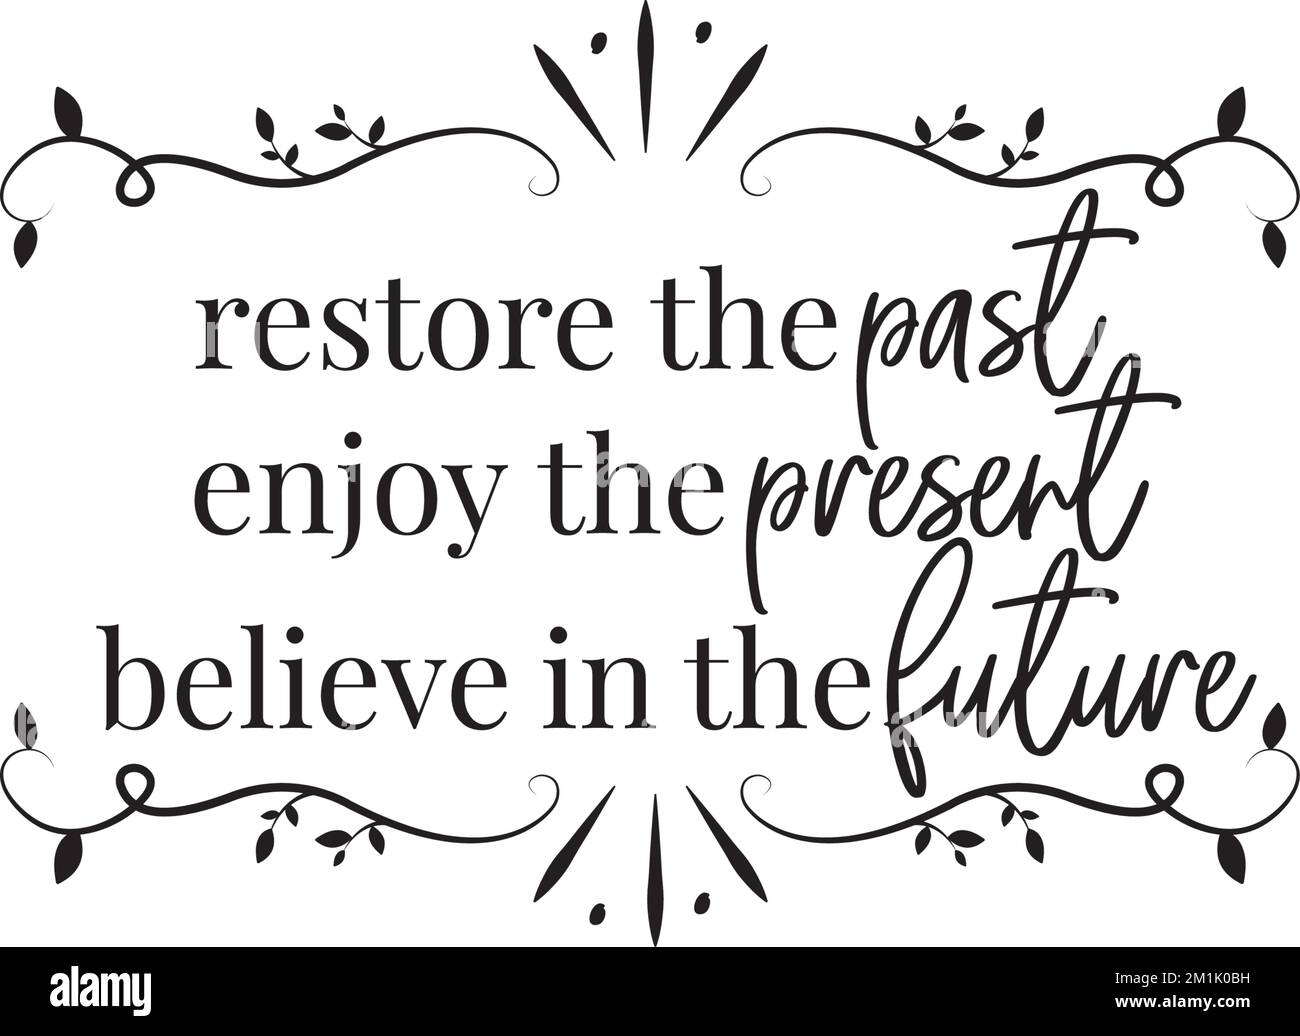 Restore the past, enjoy the present, believe in the future, vector. Daily affirmation, positive thinking. Stencil art design isolated on white Stock Vector